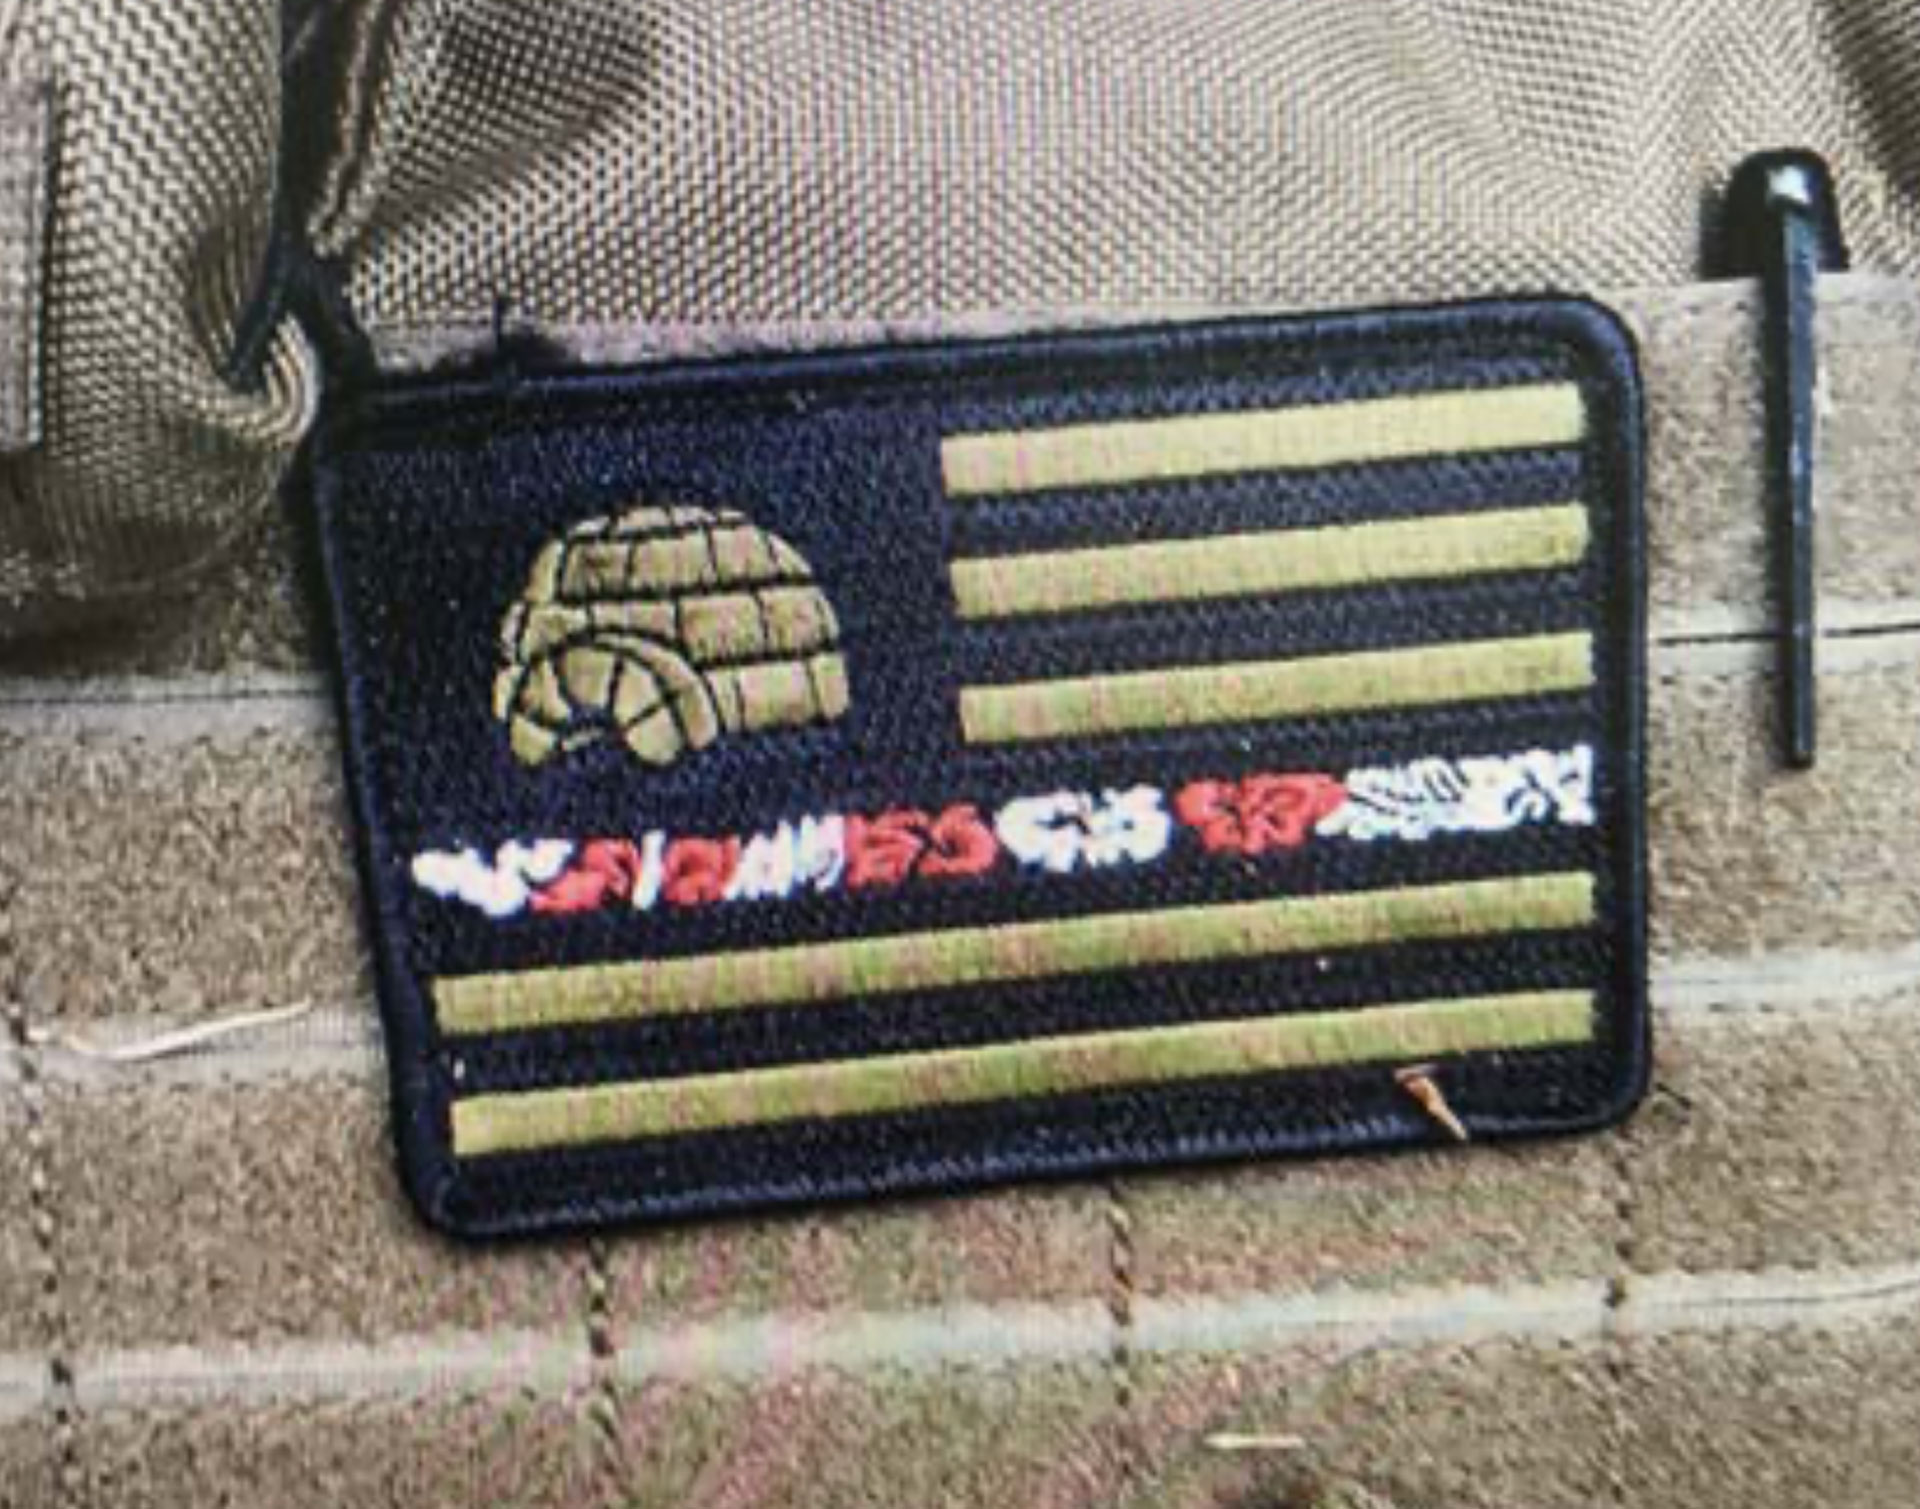 A patch with symbols associated with the far-right 'Boogaloo' movement was found sewn onto Steven Carrillo's ballistic vest following a search of his van by law enforcement.